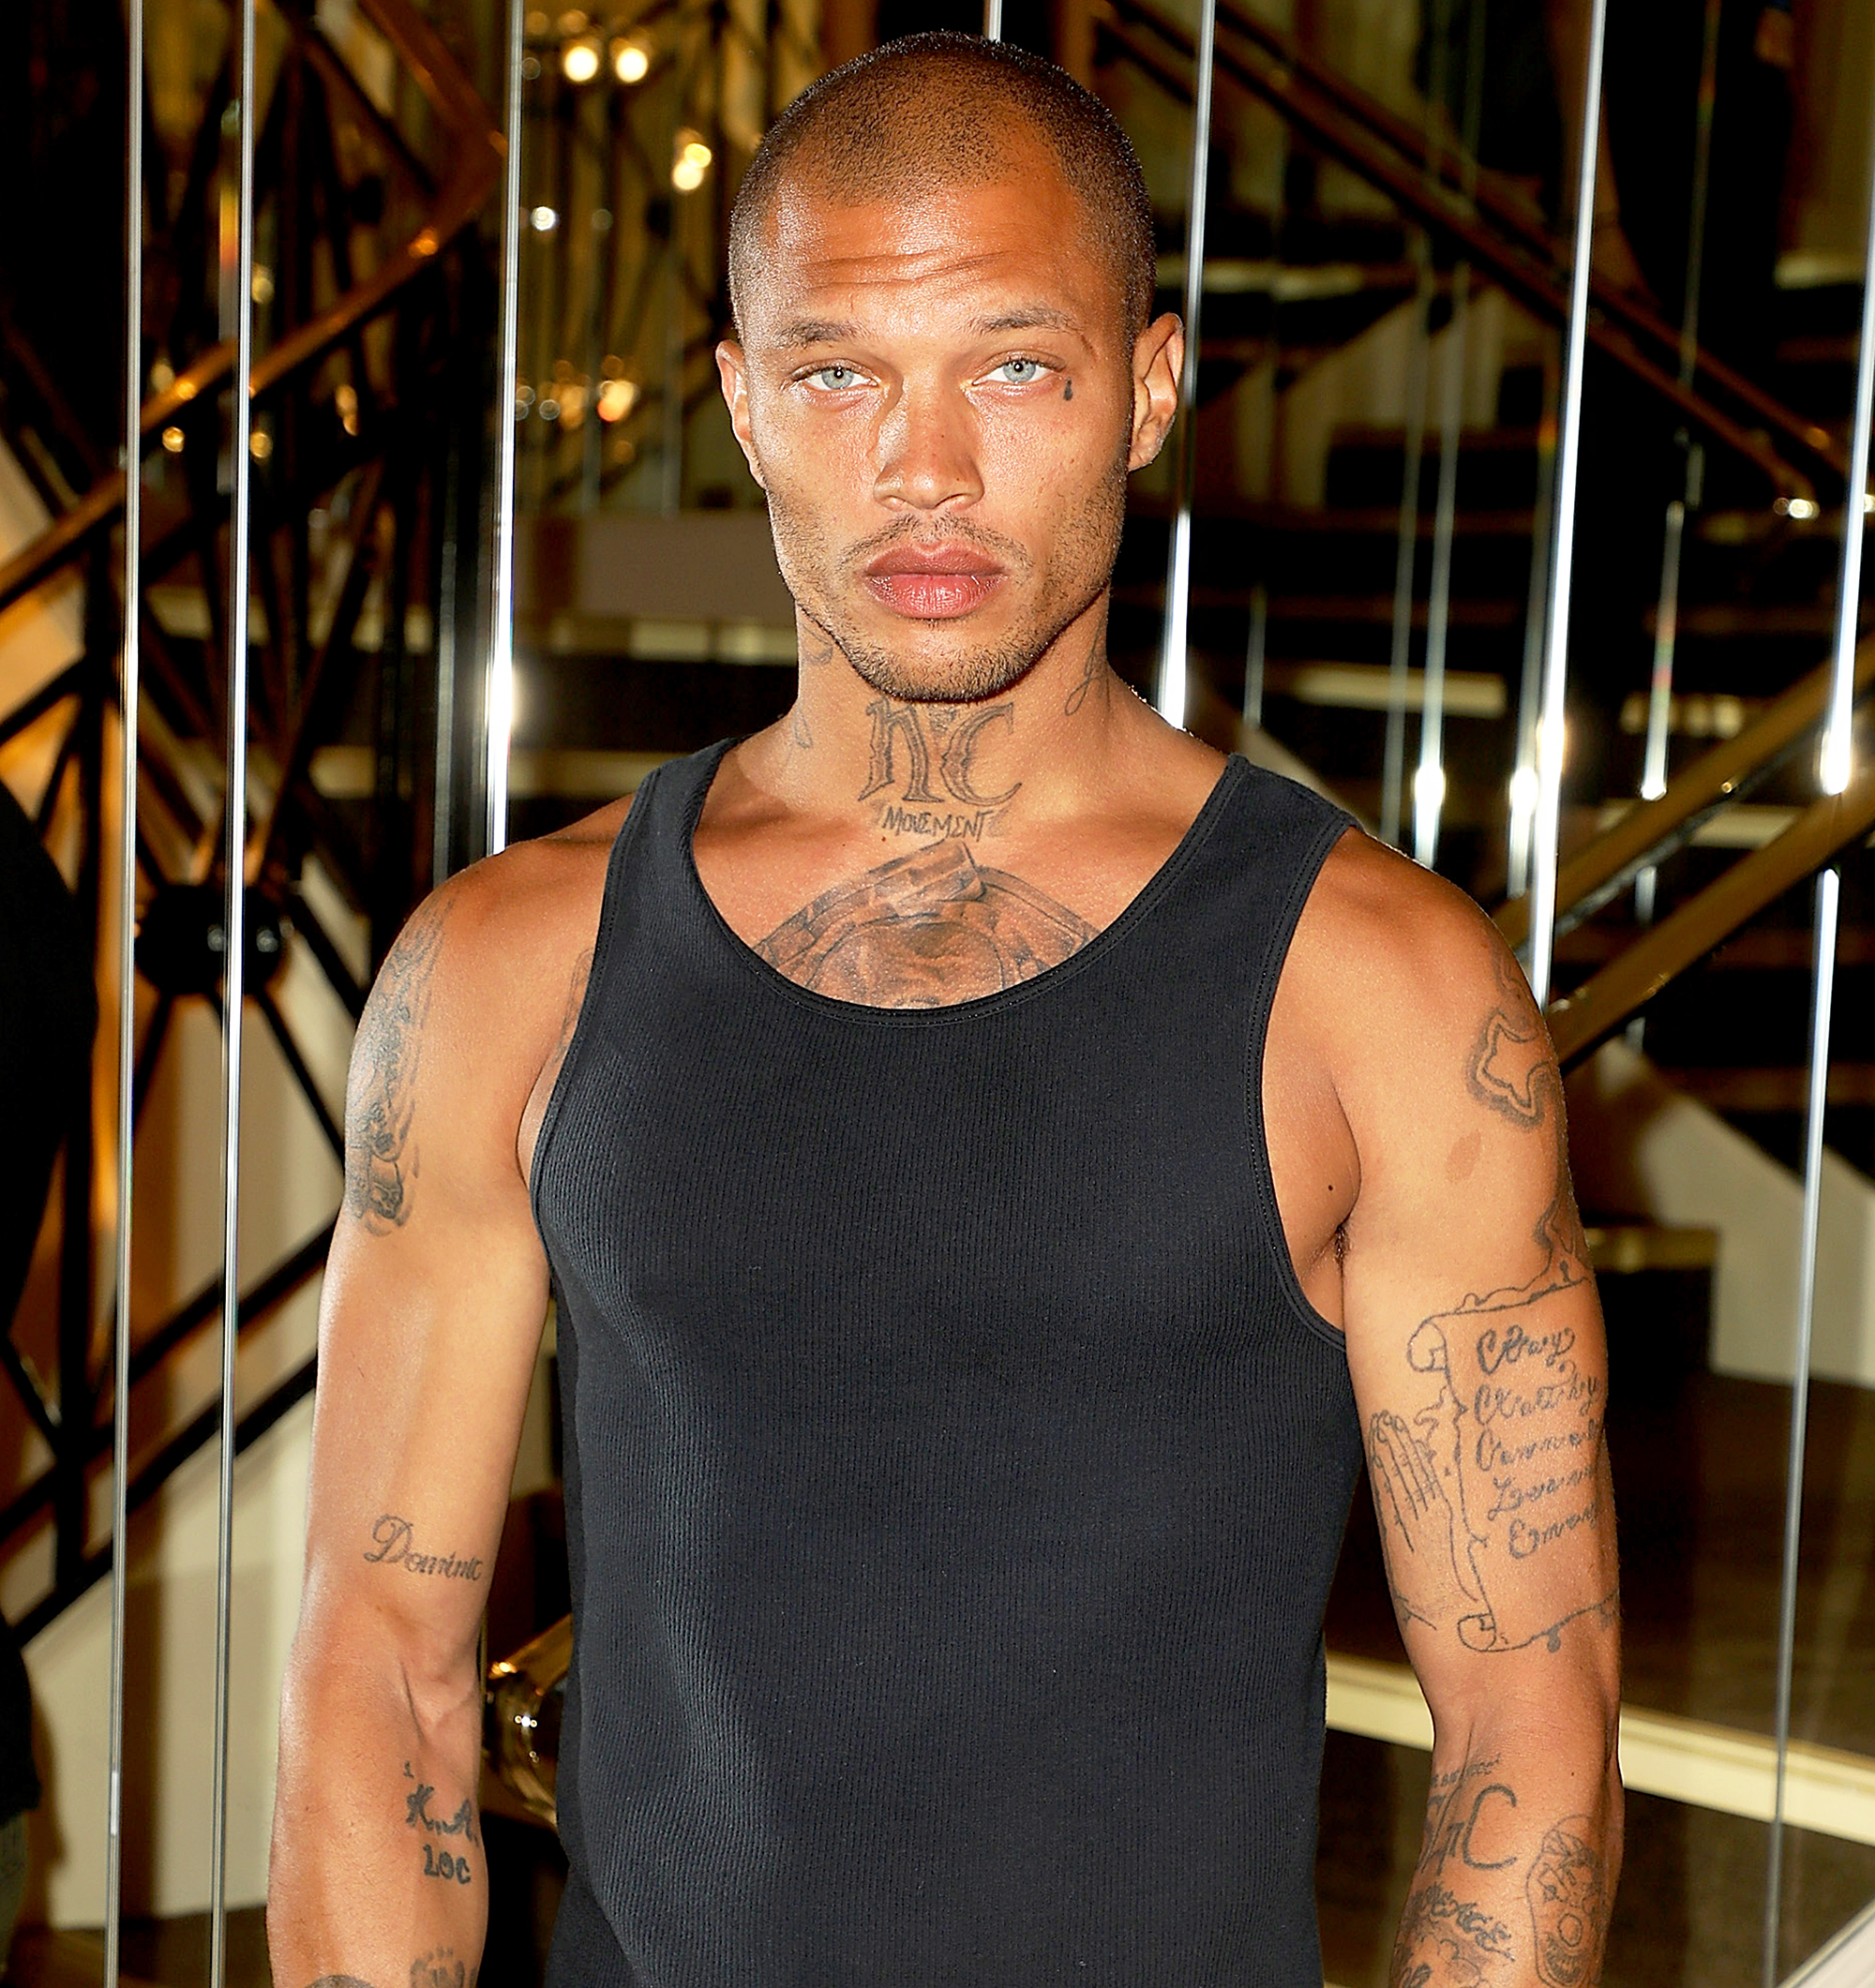 Two More Mug Shots Of Jeremy Meeks The Fetching Felon Who Makes Some  Ladies Swoon  The Smoking Gun